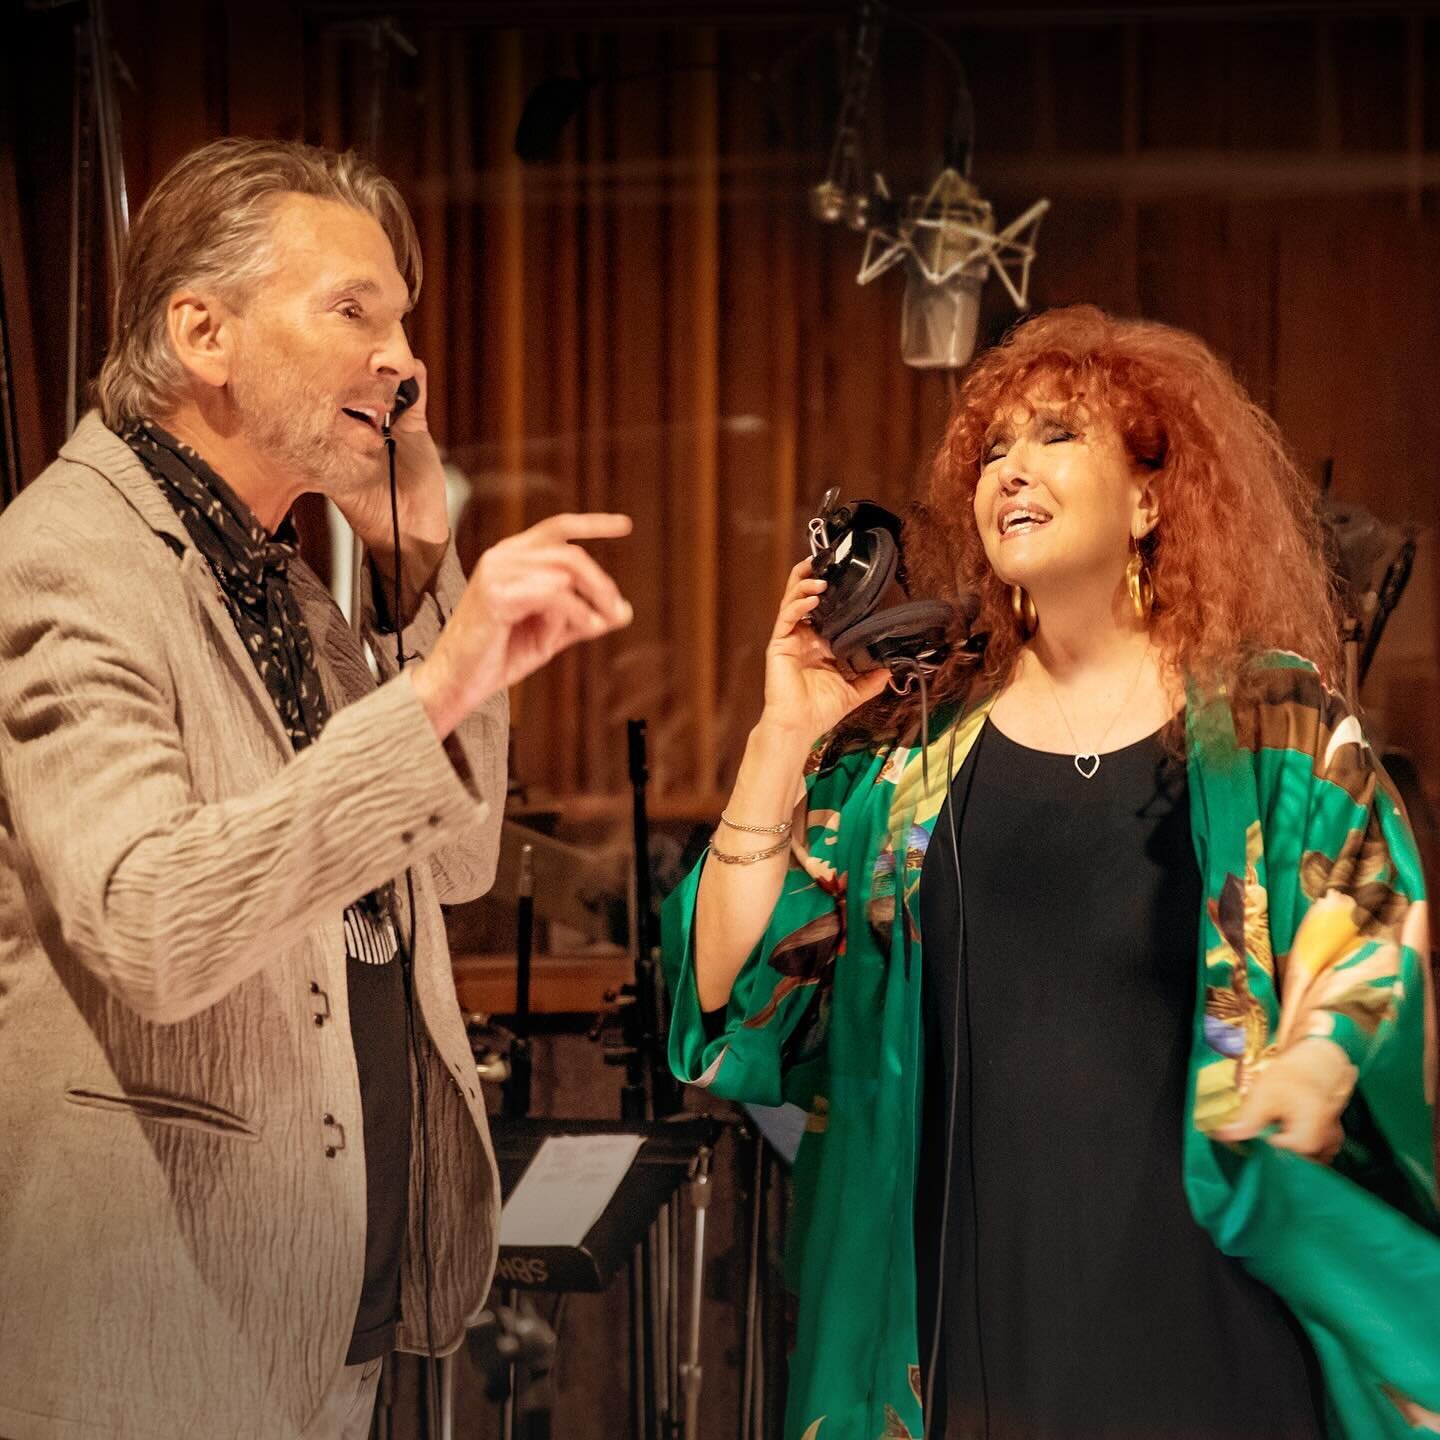 Reliant client Melissa Manchester celebrates her 50th Anniversary as a recording and concert Artist performing with client Kenny Loggins and Country legend Dolly Parton as part of her 25th album, RE:VIEW, a collection of ten of her 19 Billboard chart